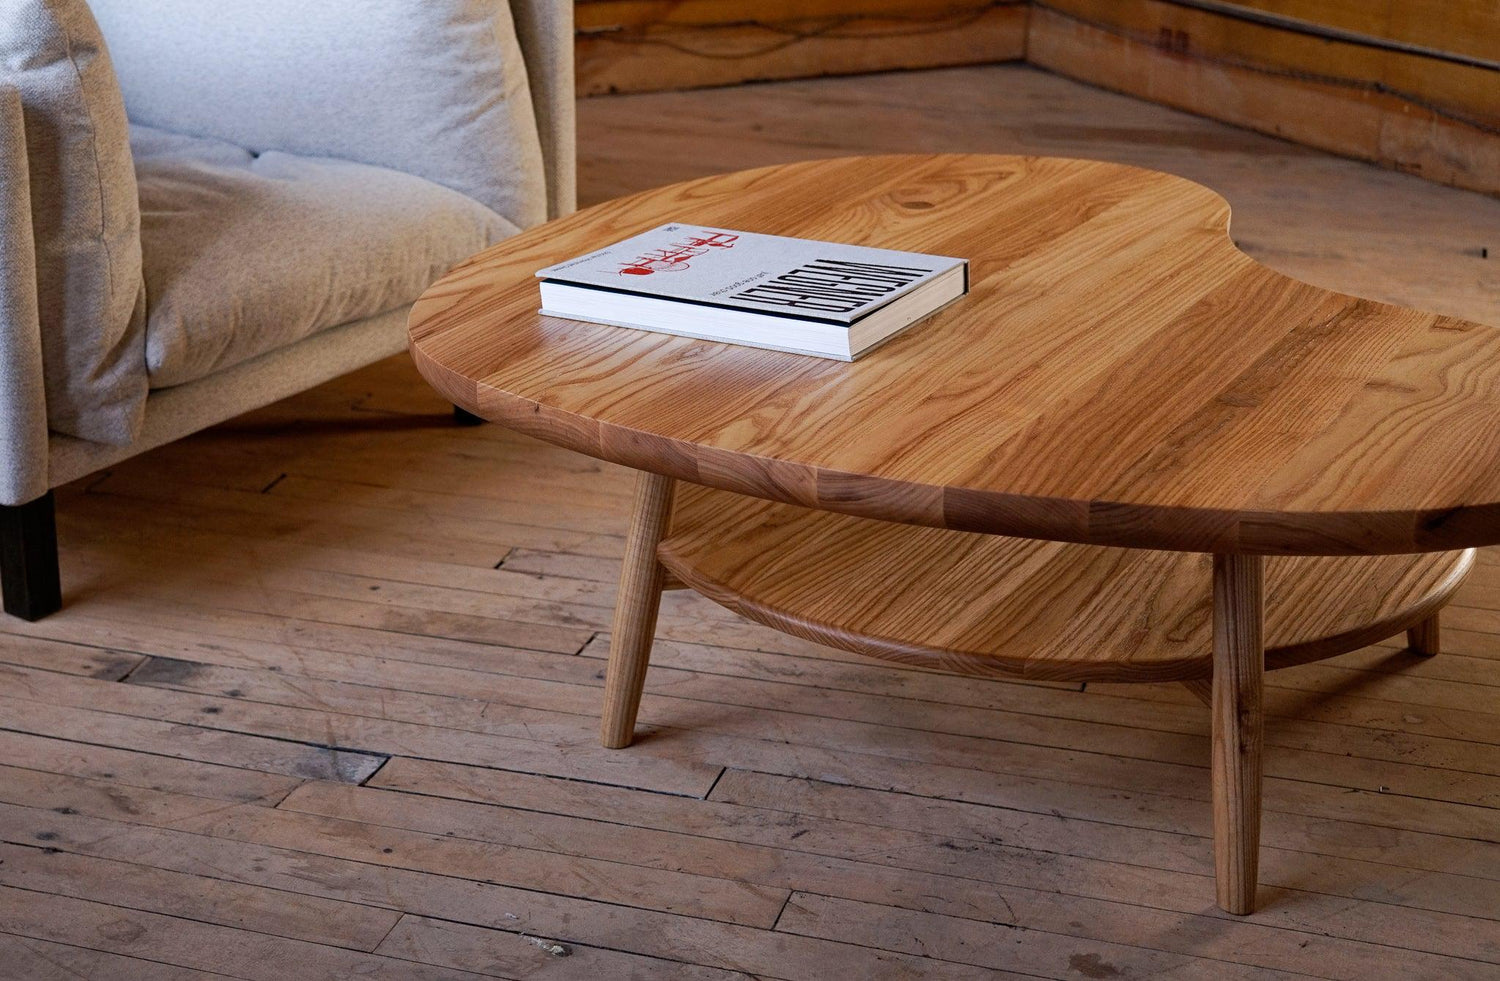 A custom coffee table in a mid century modern style.